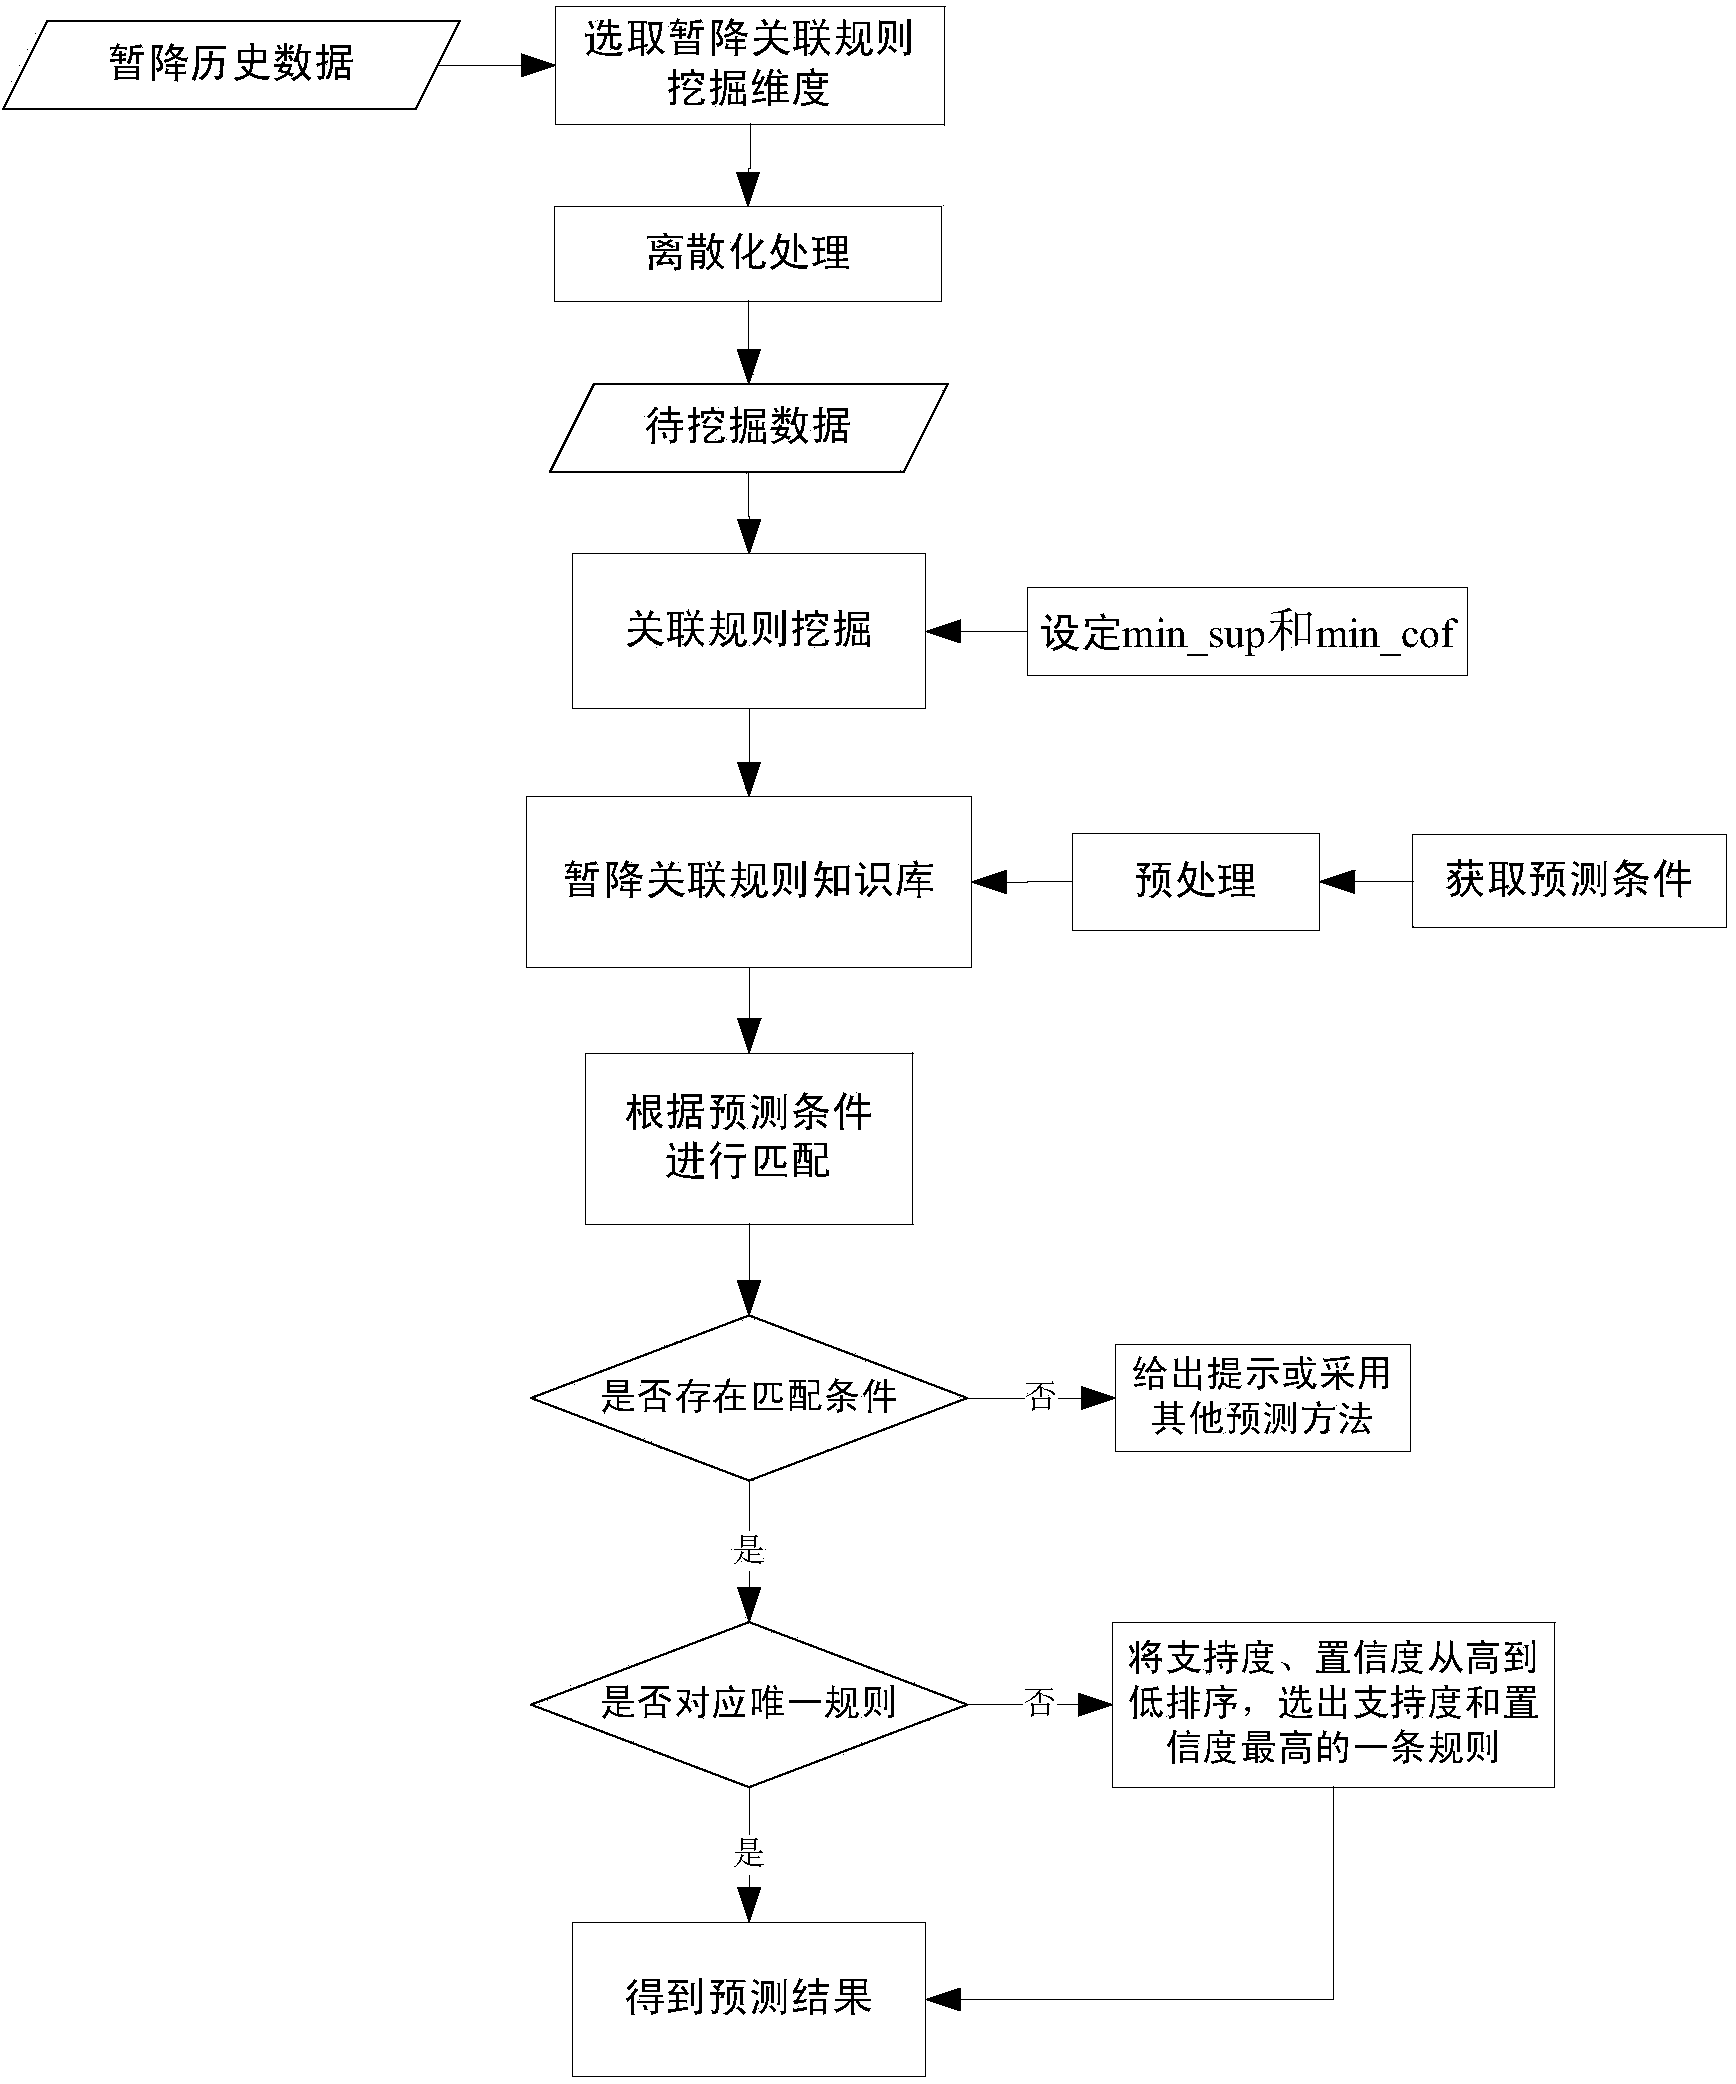 Multi-dimension and multi-level association rule based voltage sag predicting and analyzing method